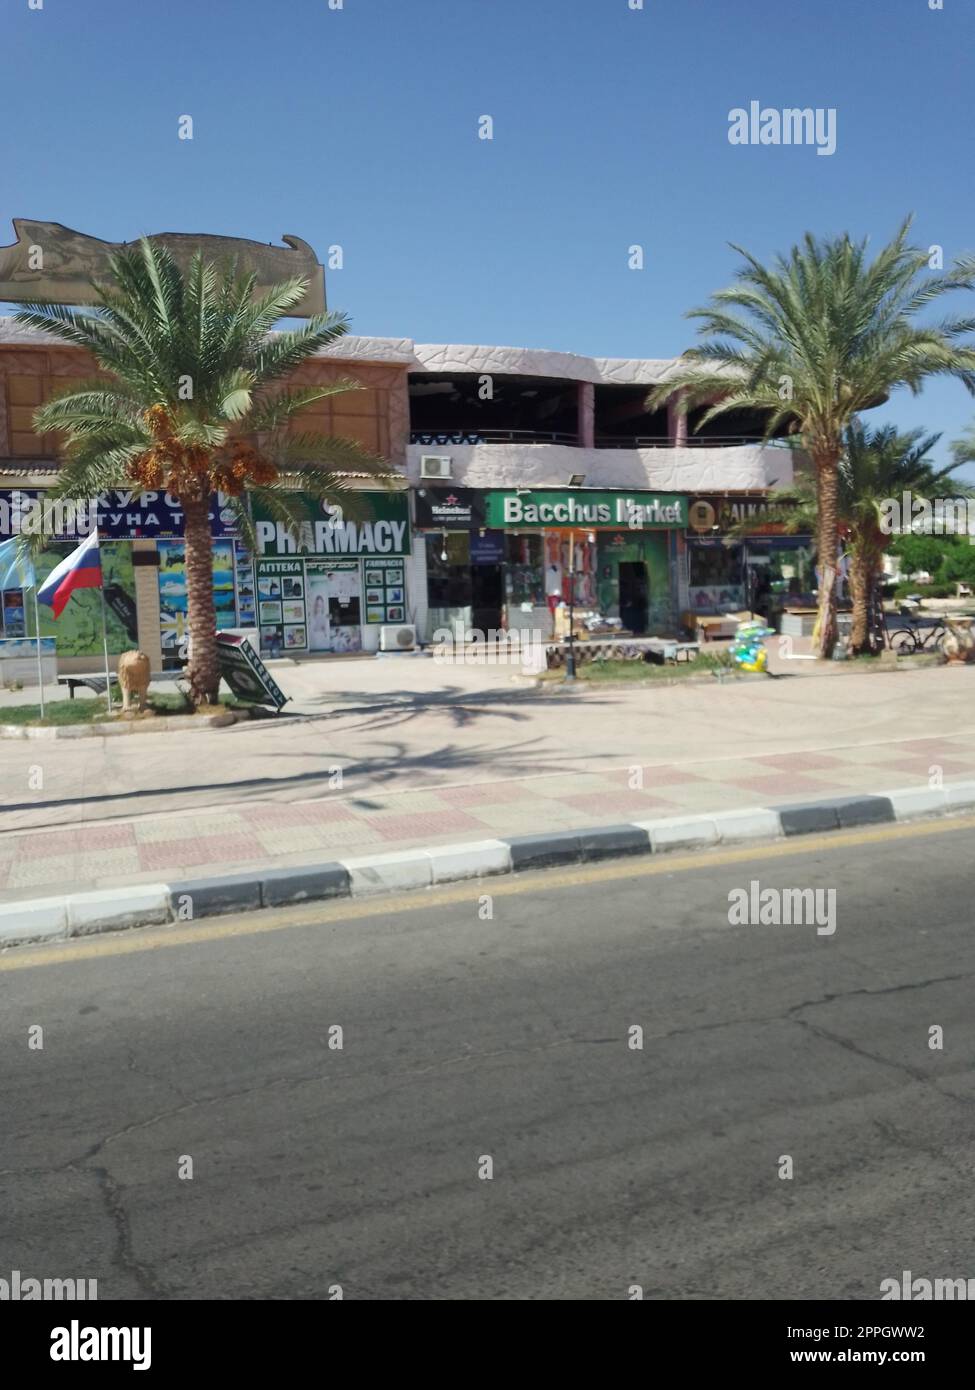 Trading shops Bacchus market and Pharmacy in the resort city  of Sharm el-Sheikh. Egypt Stock Photo